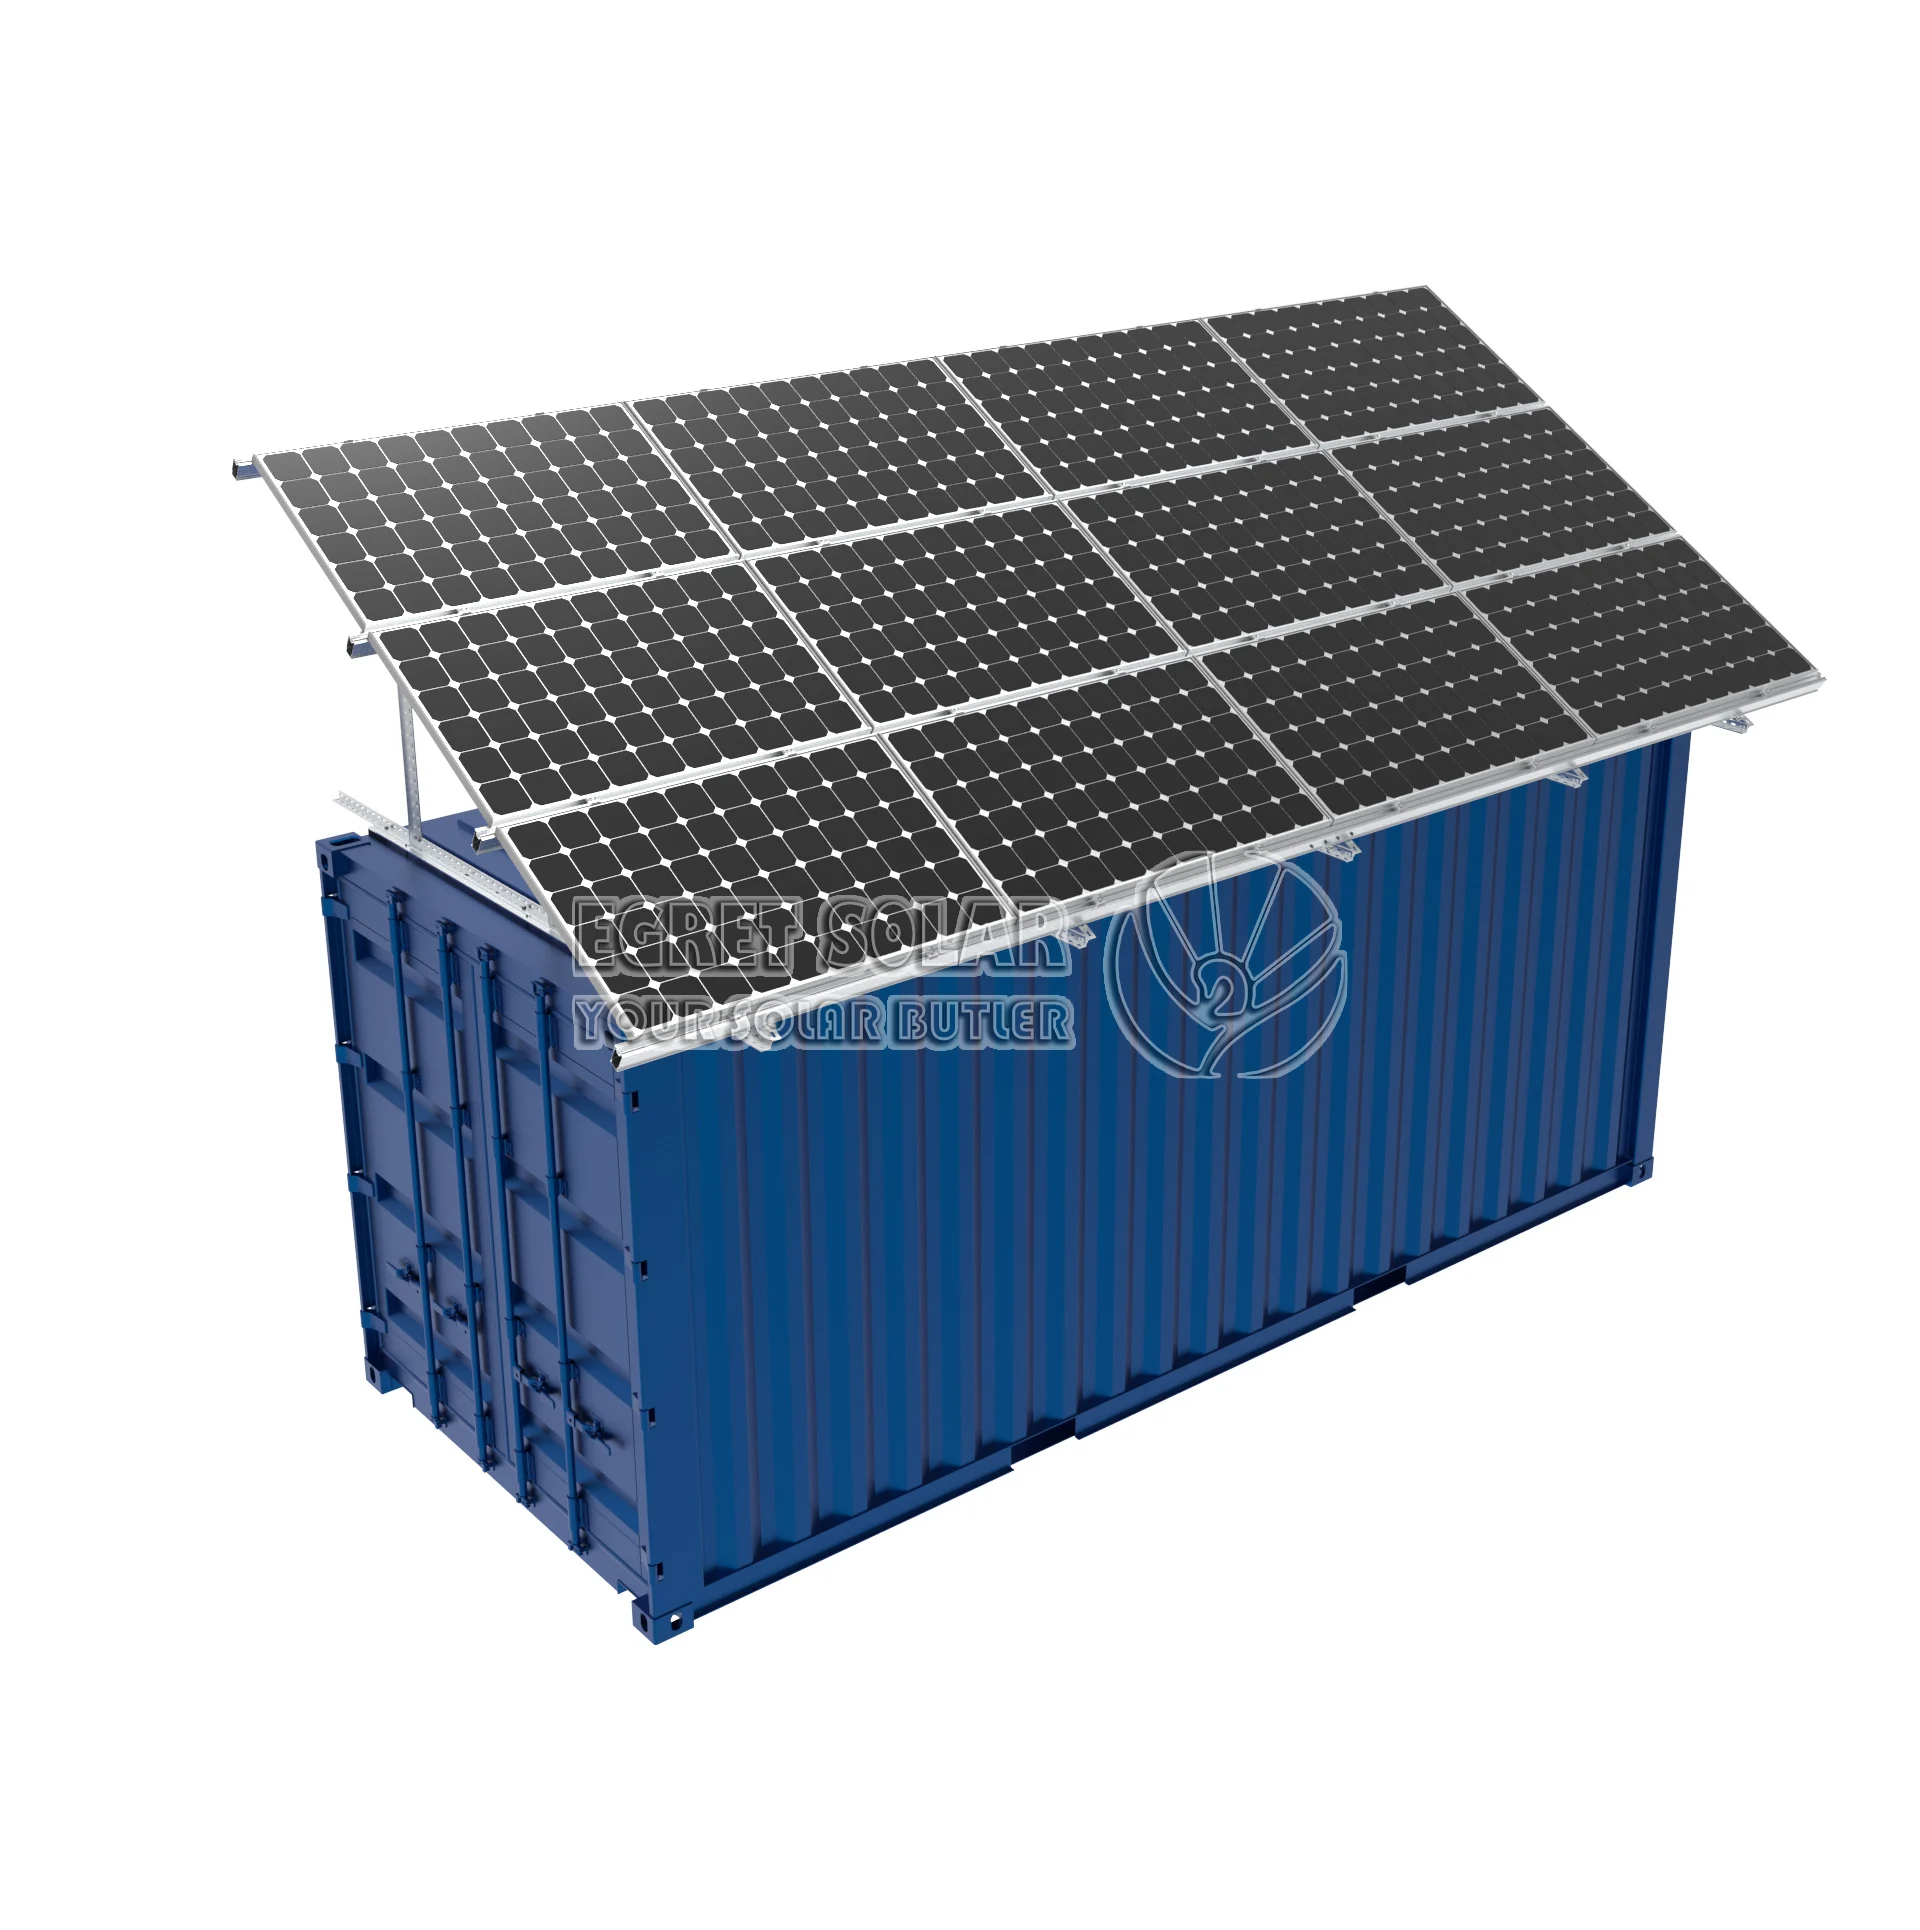 Install solar mounting structures on the containers